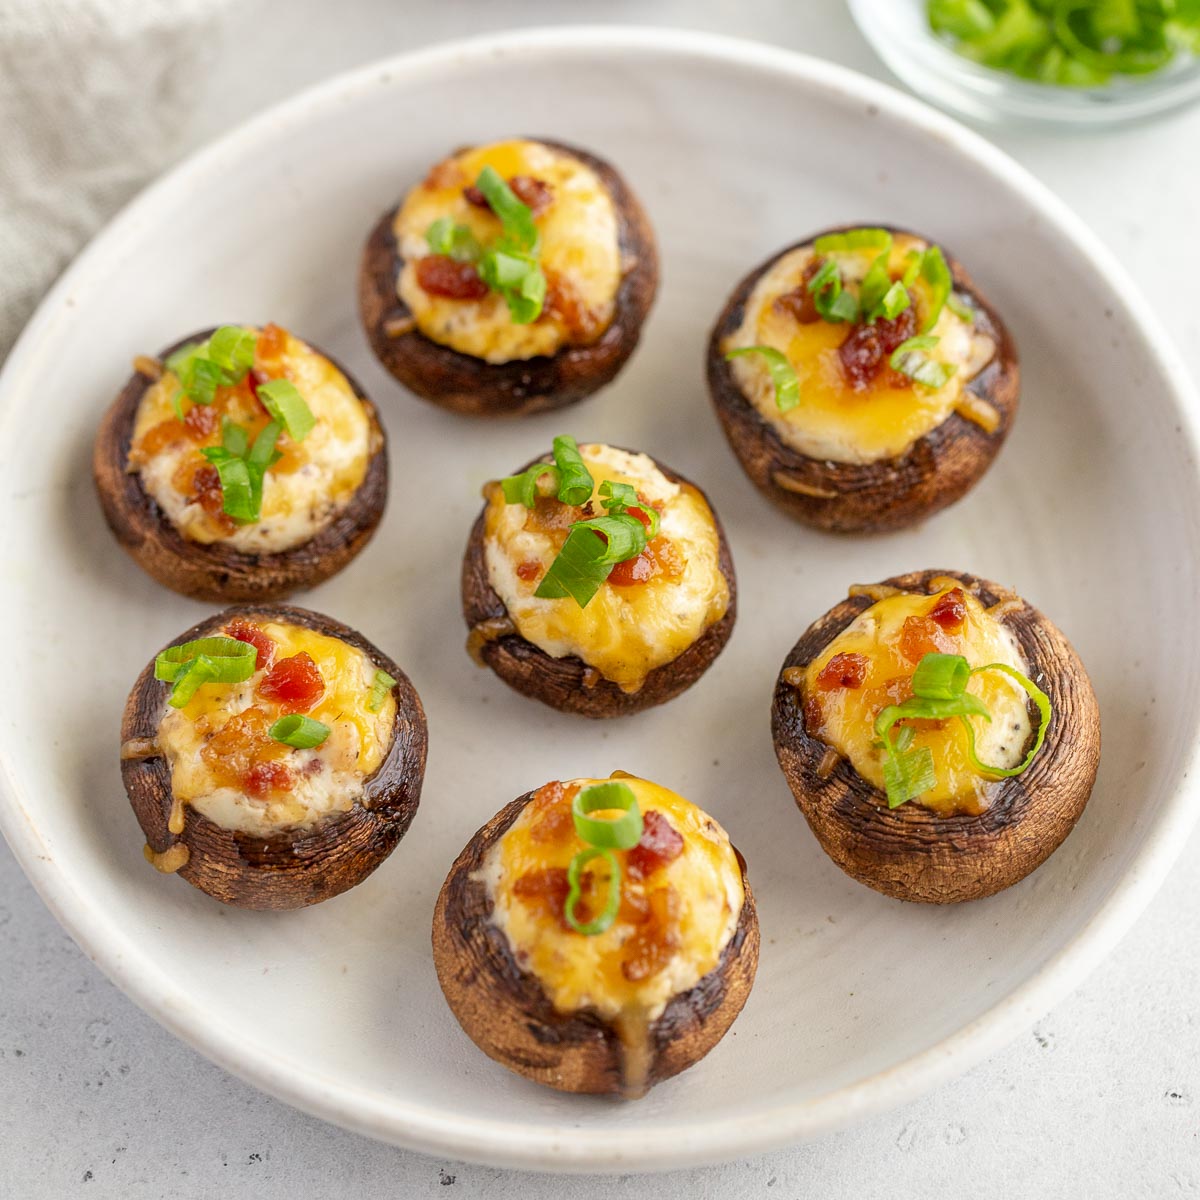 A white plate holding several grilled stuffed mushrooms.